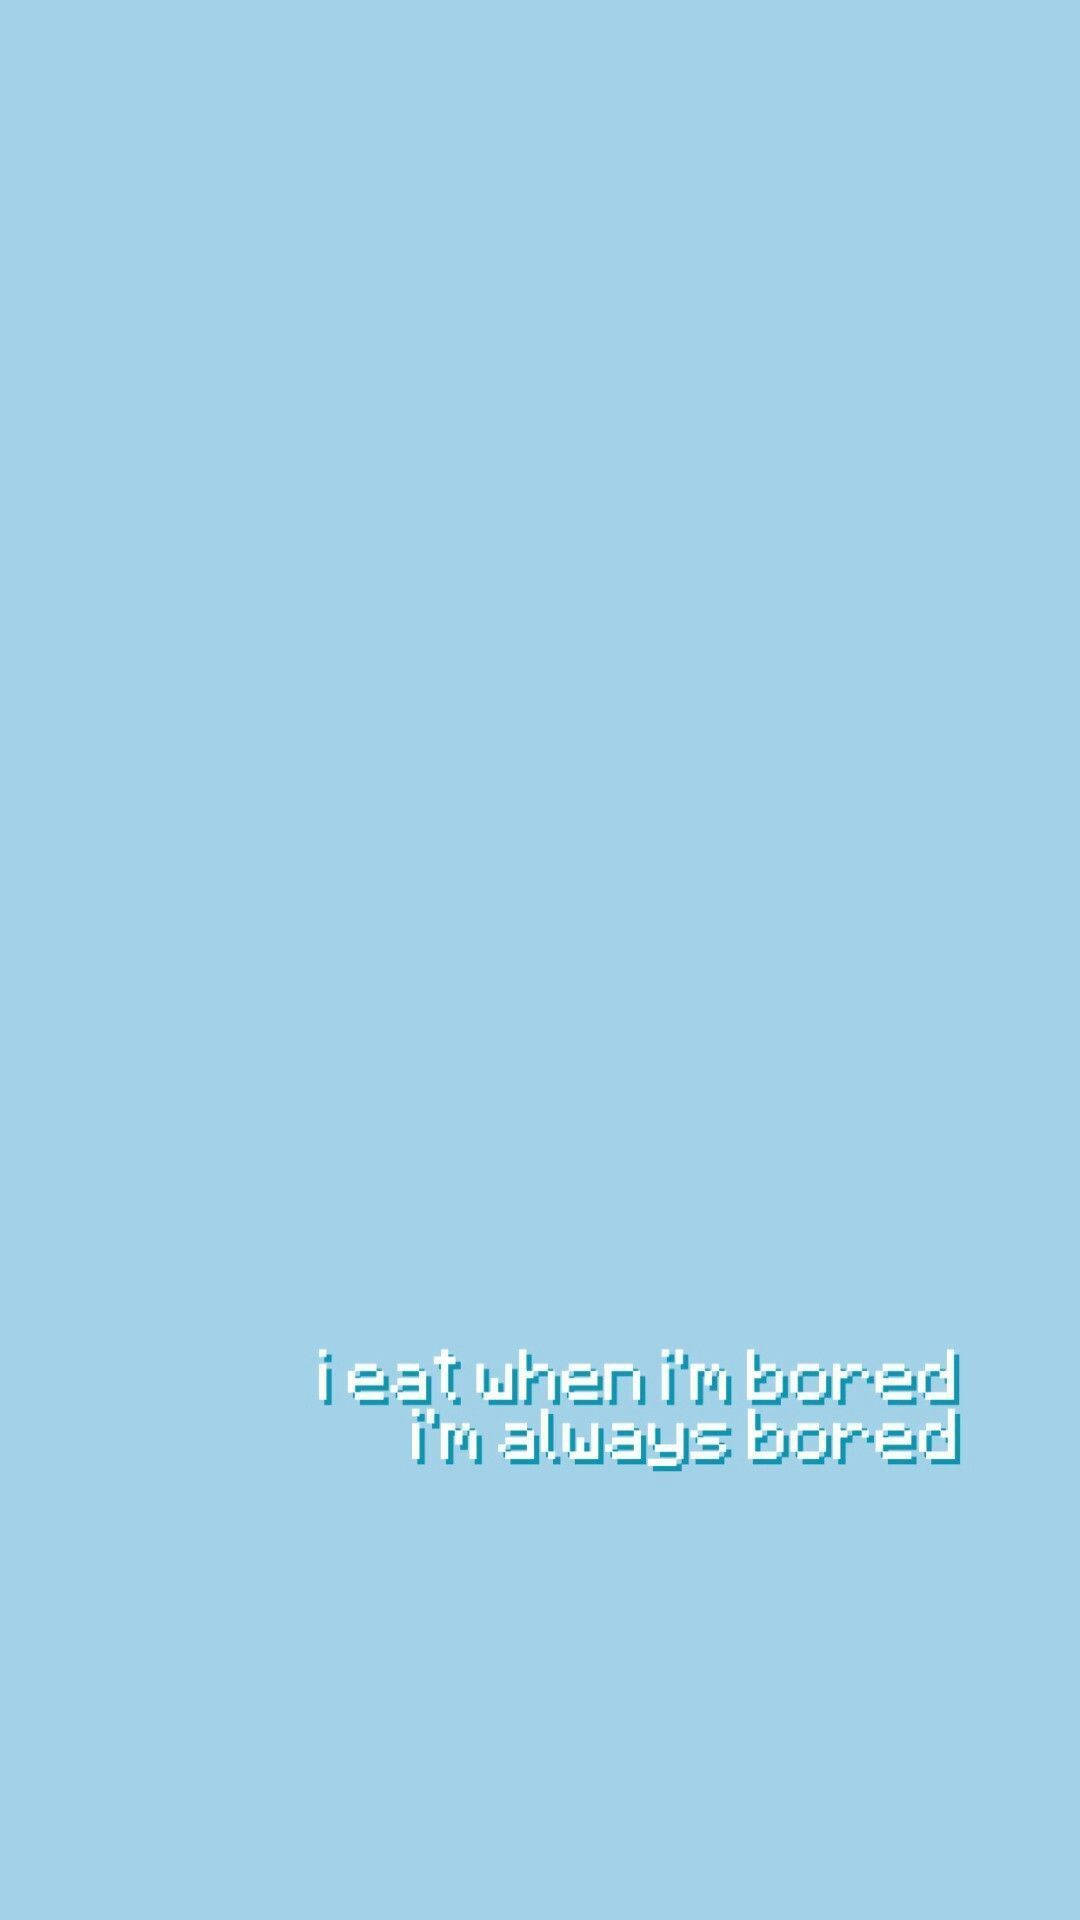 Bored Quote On Baby Blue Backdrop Background